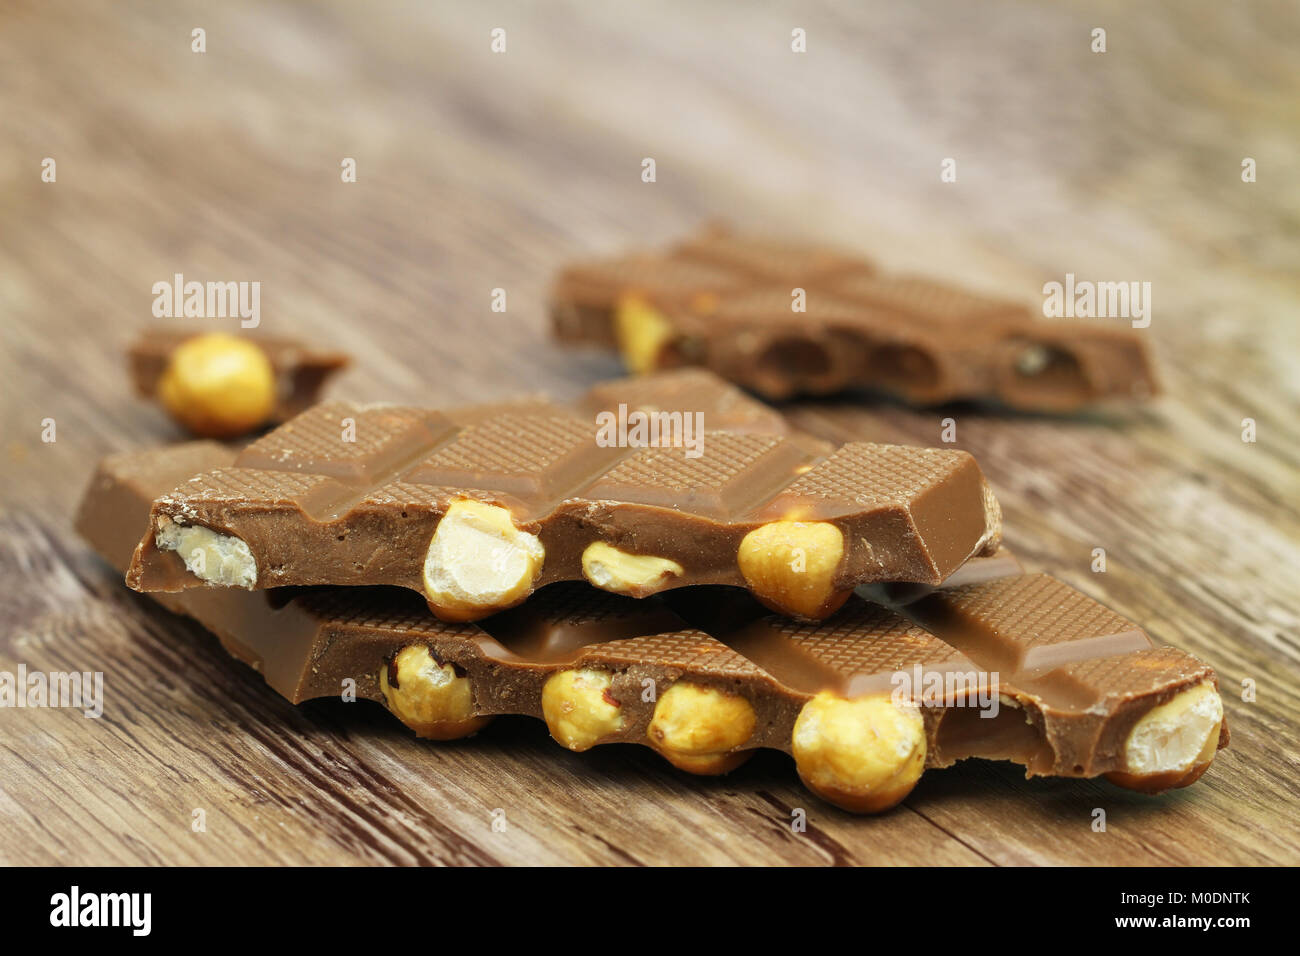 Pieces of milk chocolate with whole hazelnuts on wooden surface Stock Photo